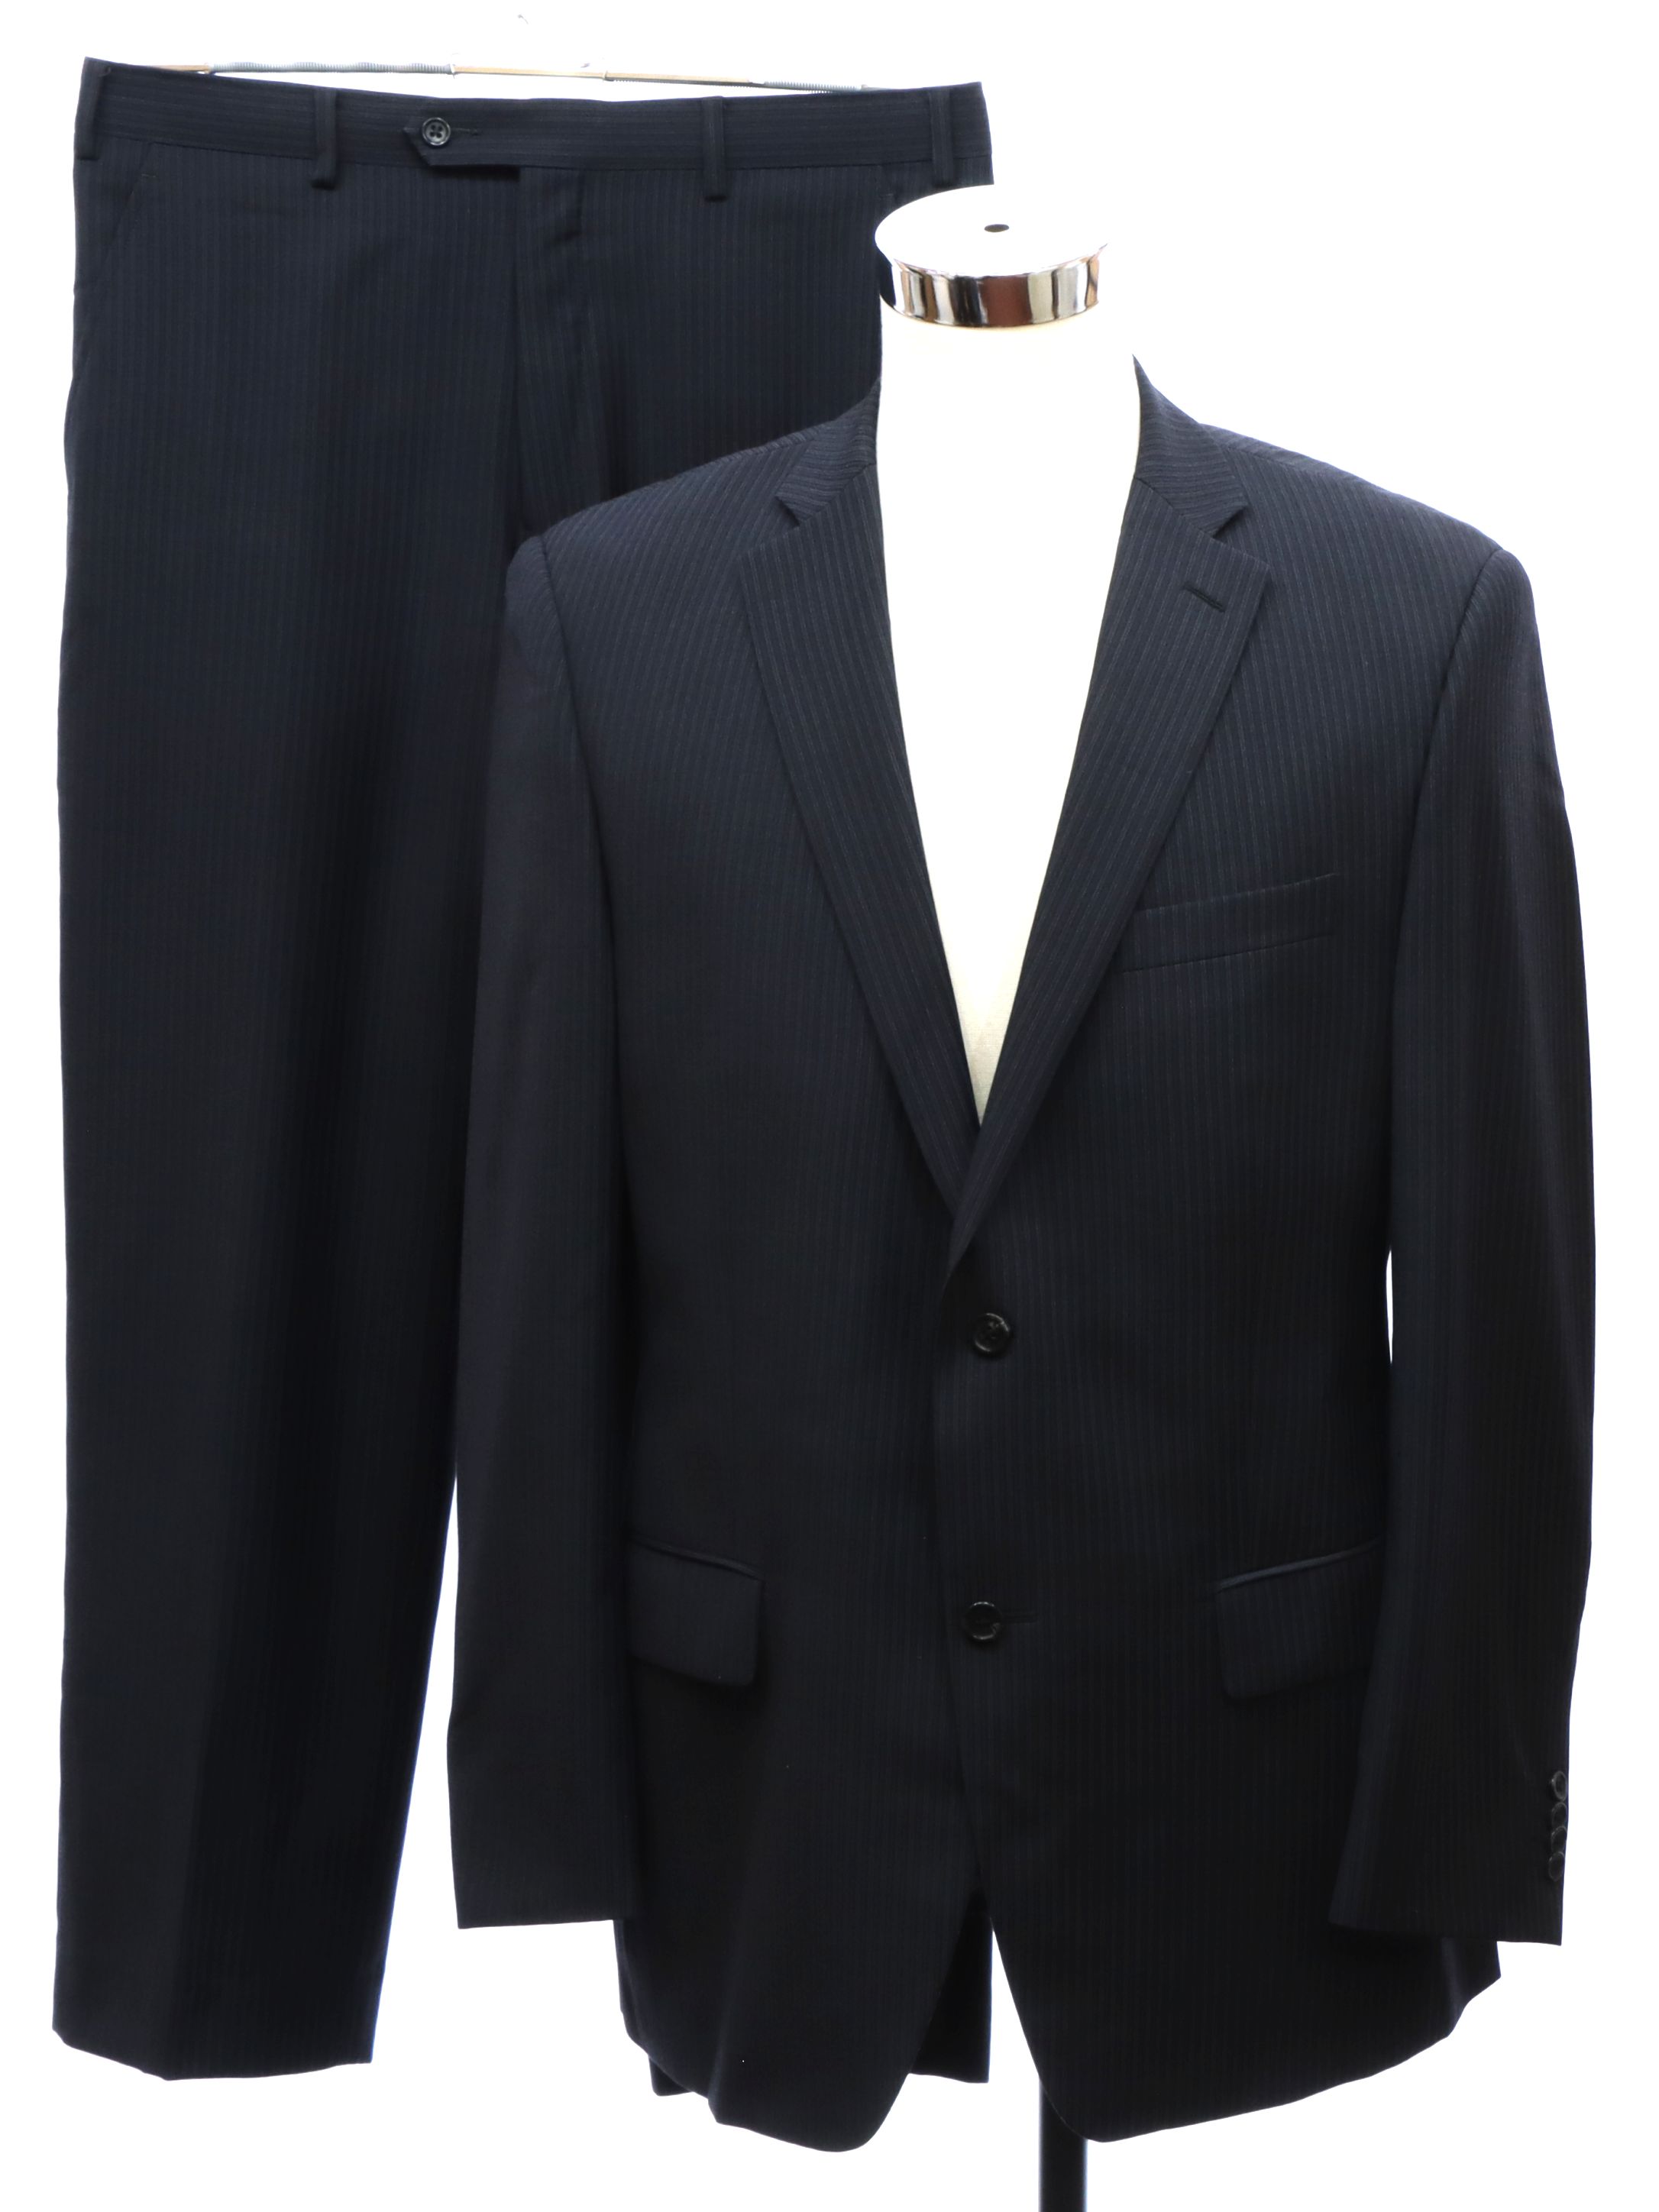 Suit: 90s -Apt 9, Made in China- Mens black background with dark blue ...